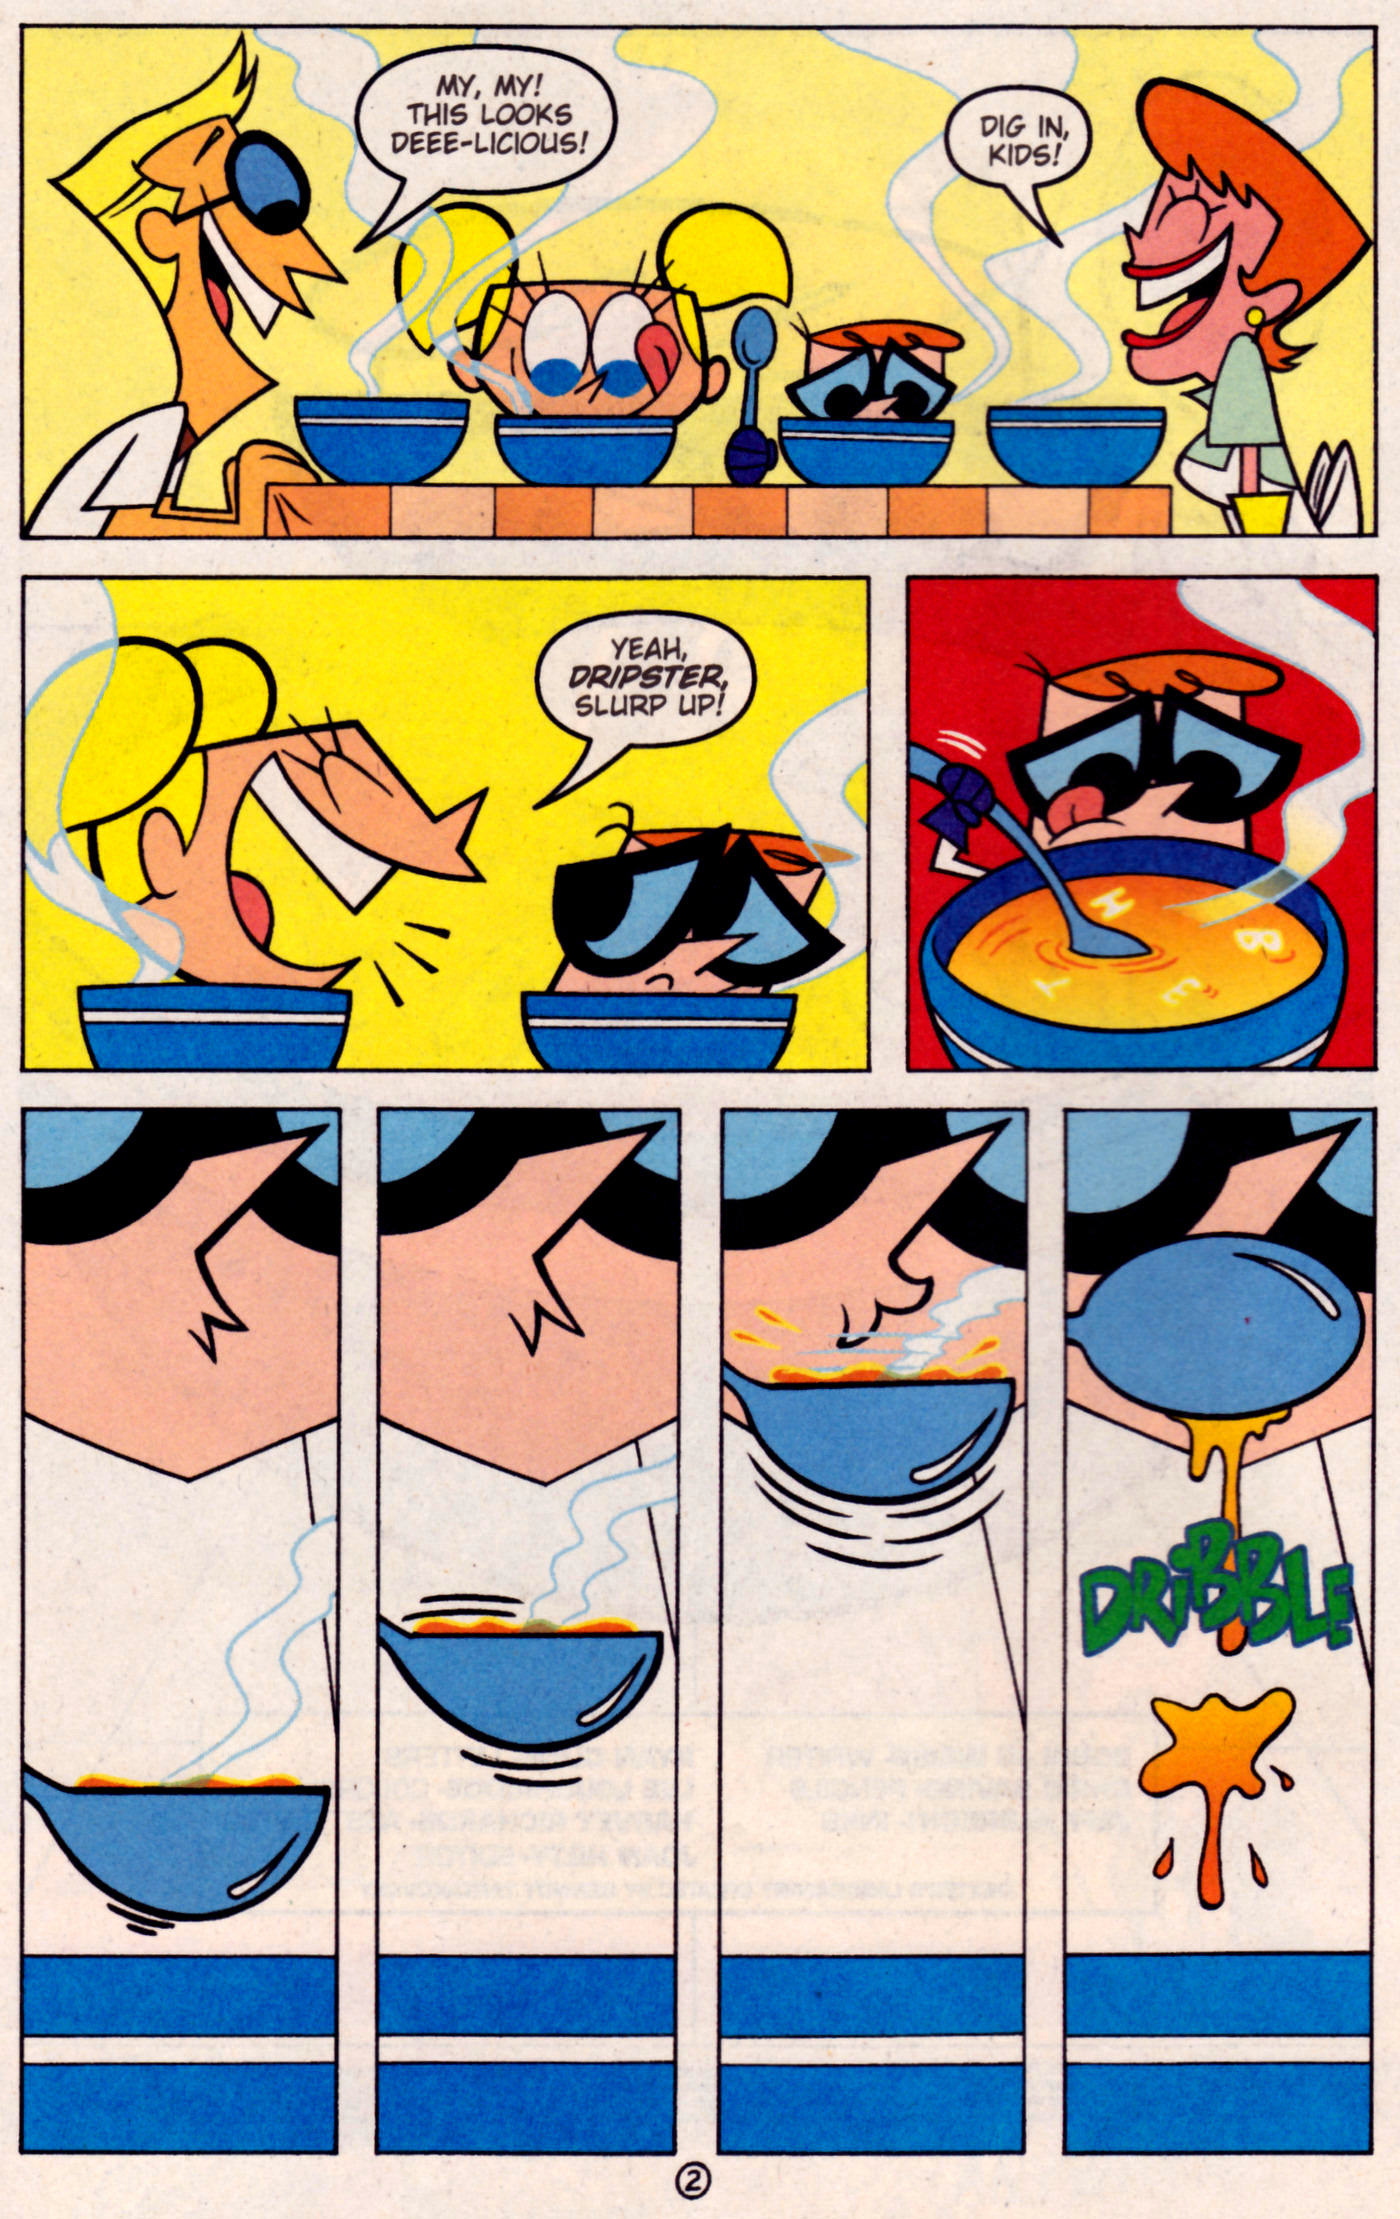 Dexters Laboratory V1 019 | Read Dexters Laboratory V1 019 comic online in  high quality. Read Full Comic online for free - Read comics online in high  quality .| READ COMIC ONLINE